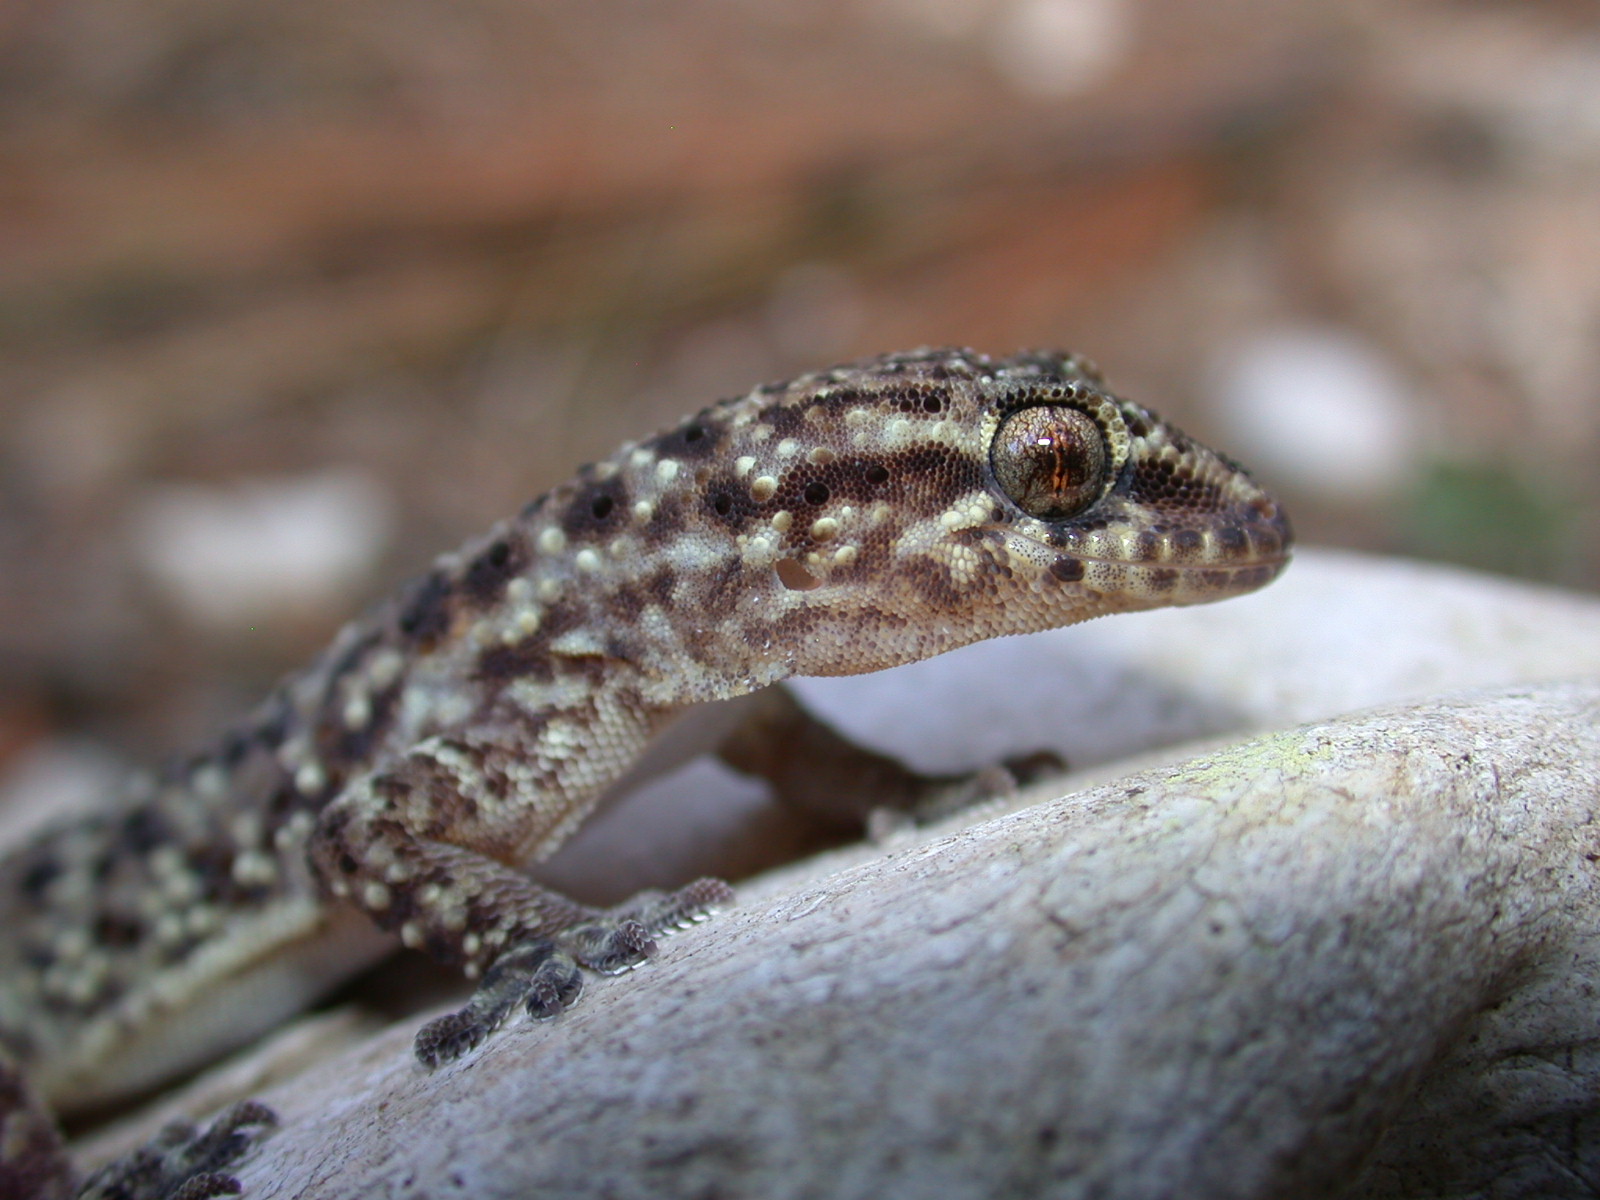 A new species of gecko from the locality of Dormaal in Belgium has been described in Royal Society Open Science.